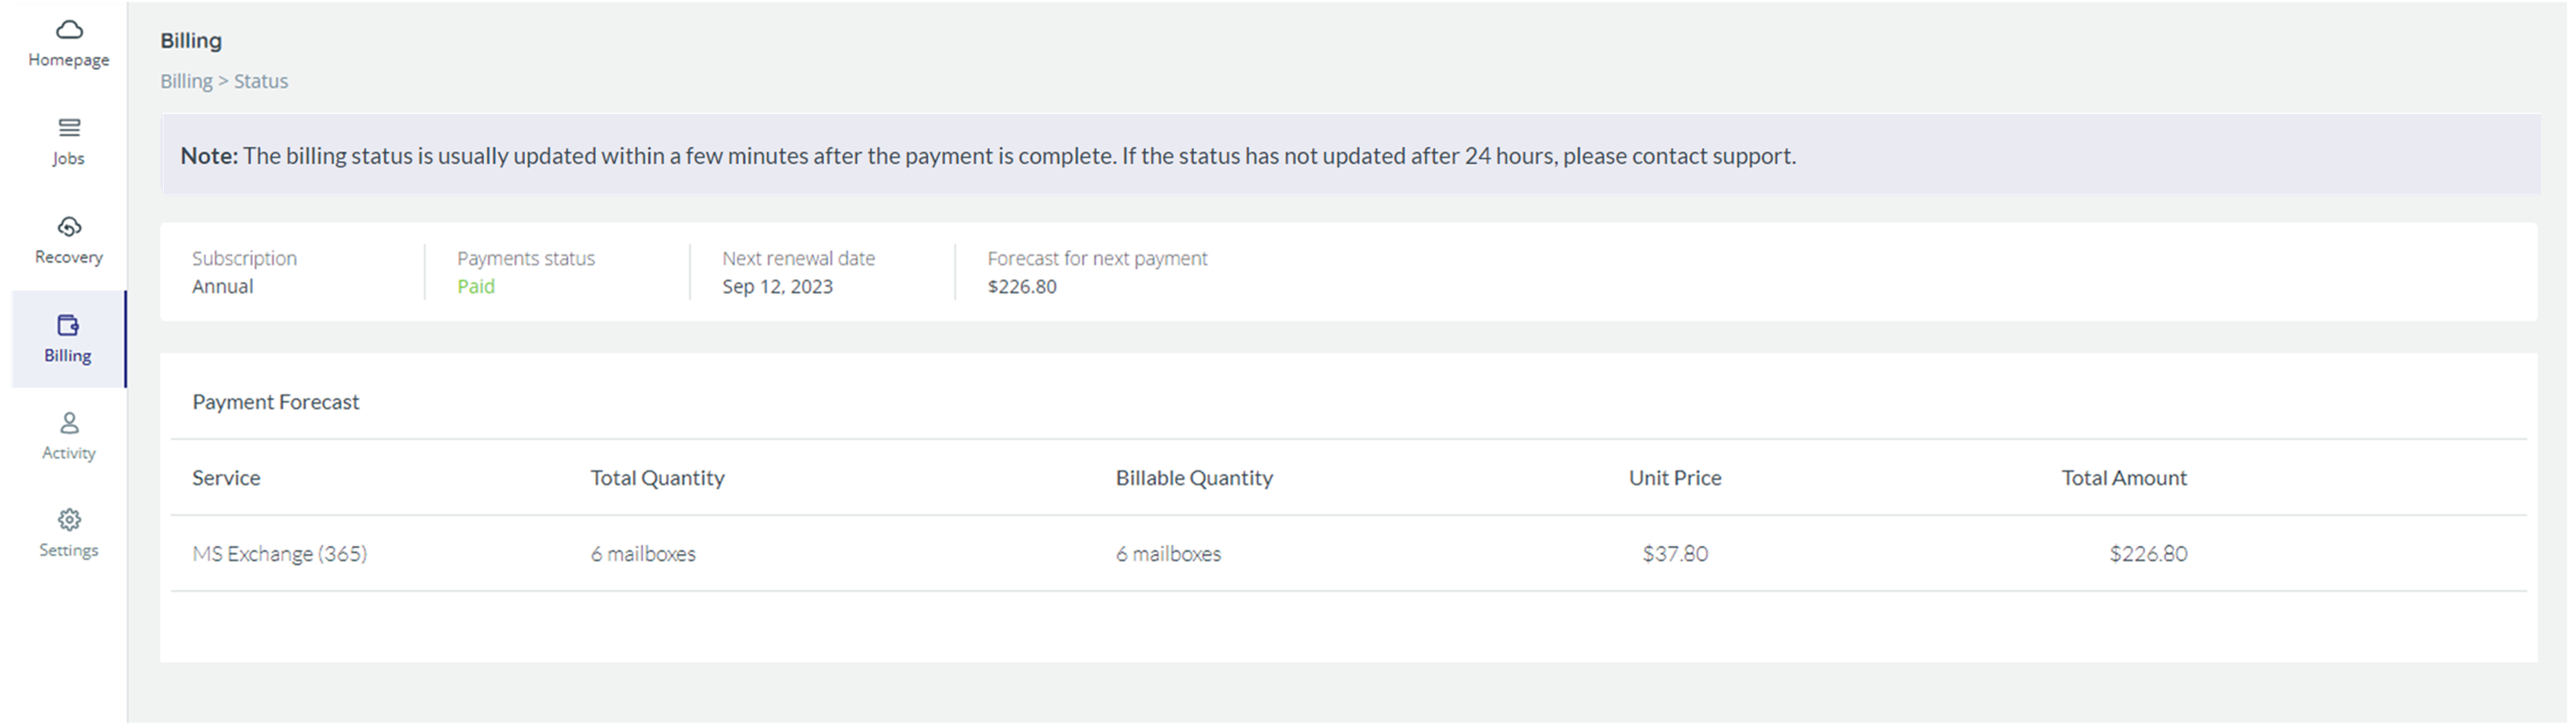 Billing status page: Service type and backup name, quantity, unit price and total amount